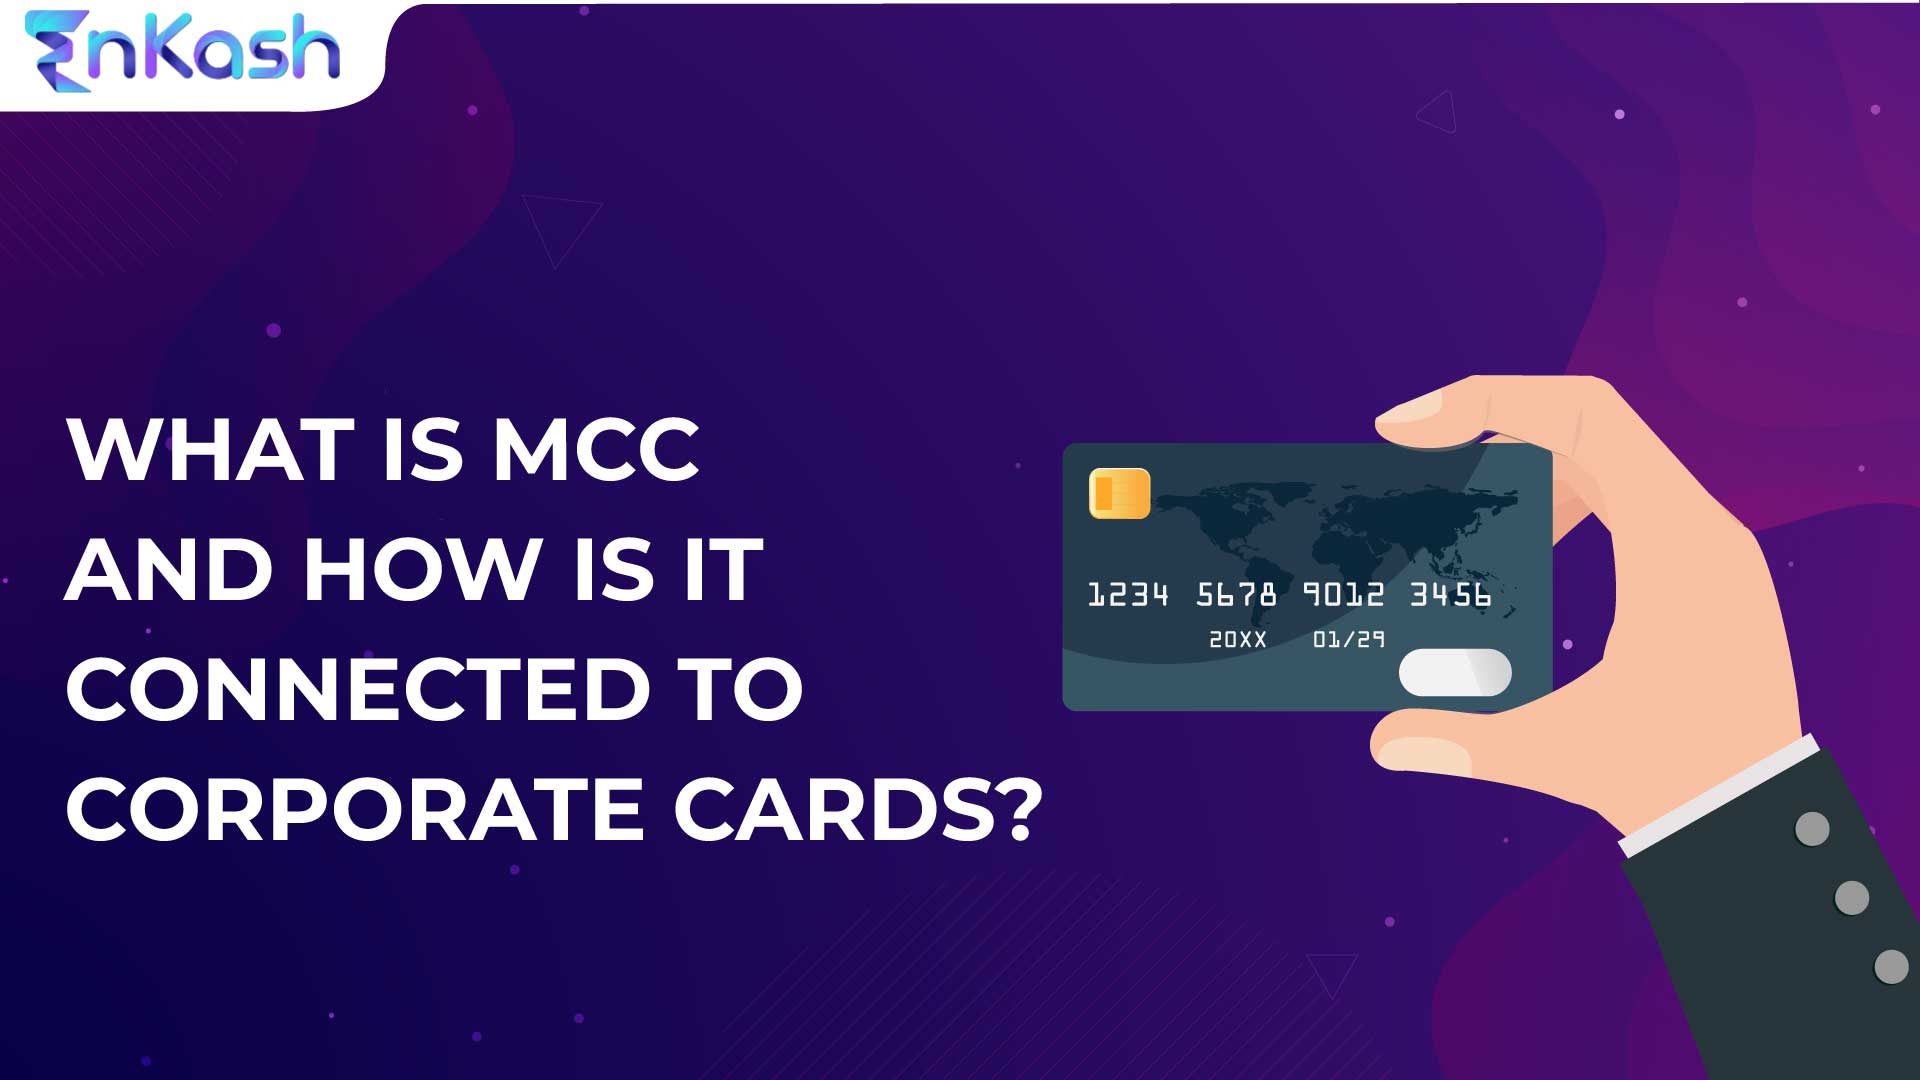 What is merchant category codes (MCC)